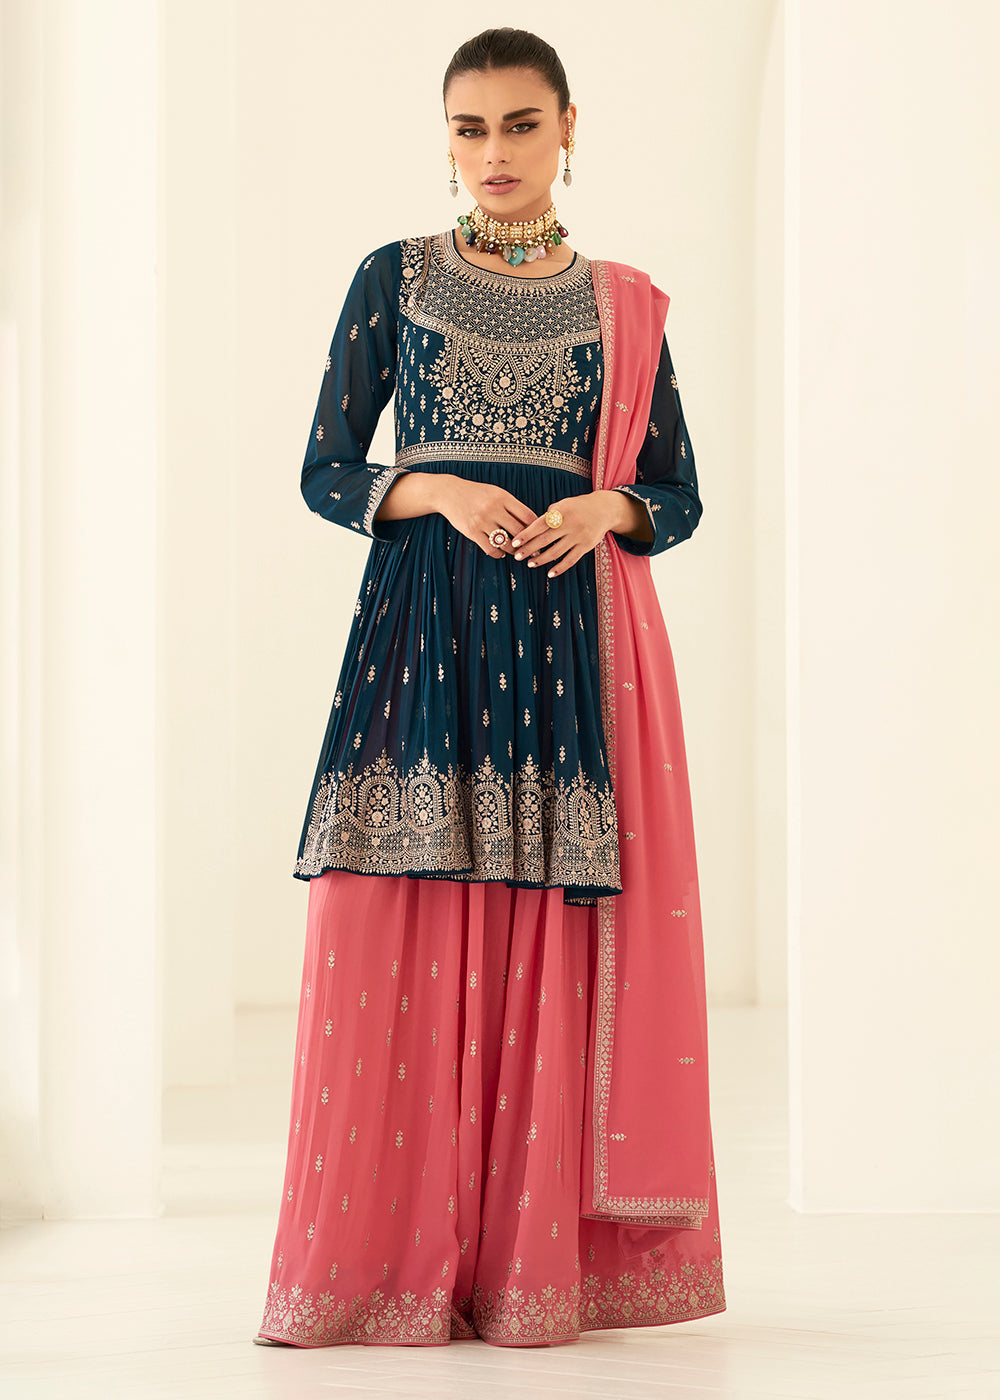 Buy Now Gorgeous Georgette Blue & Pink Wedding Palazzo Suit Online in USA, UK, Canada, Germany, Australia & Worldwide at Empress Clothing. 